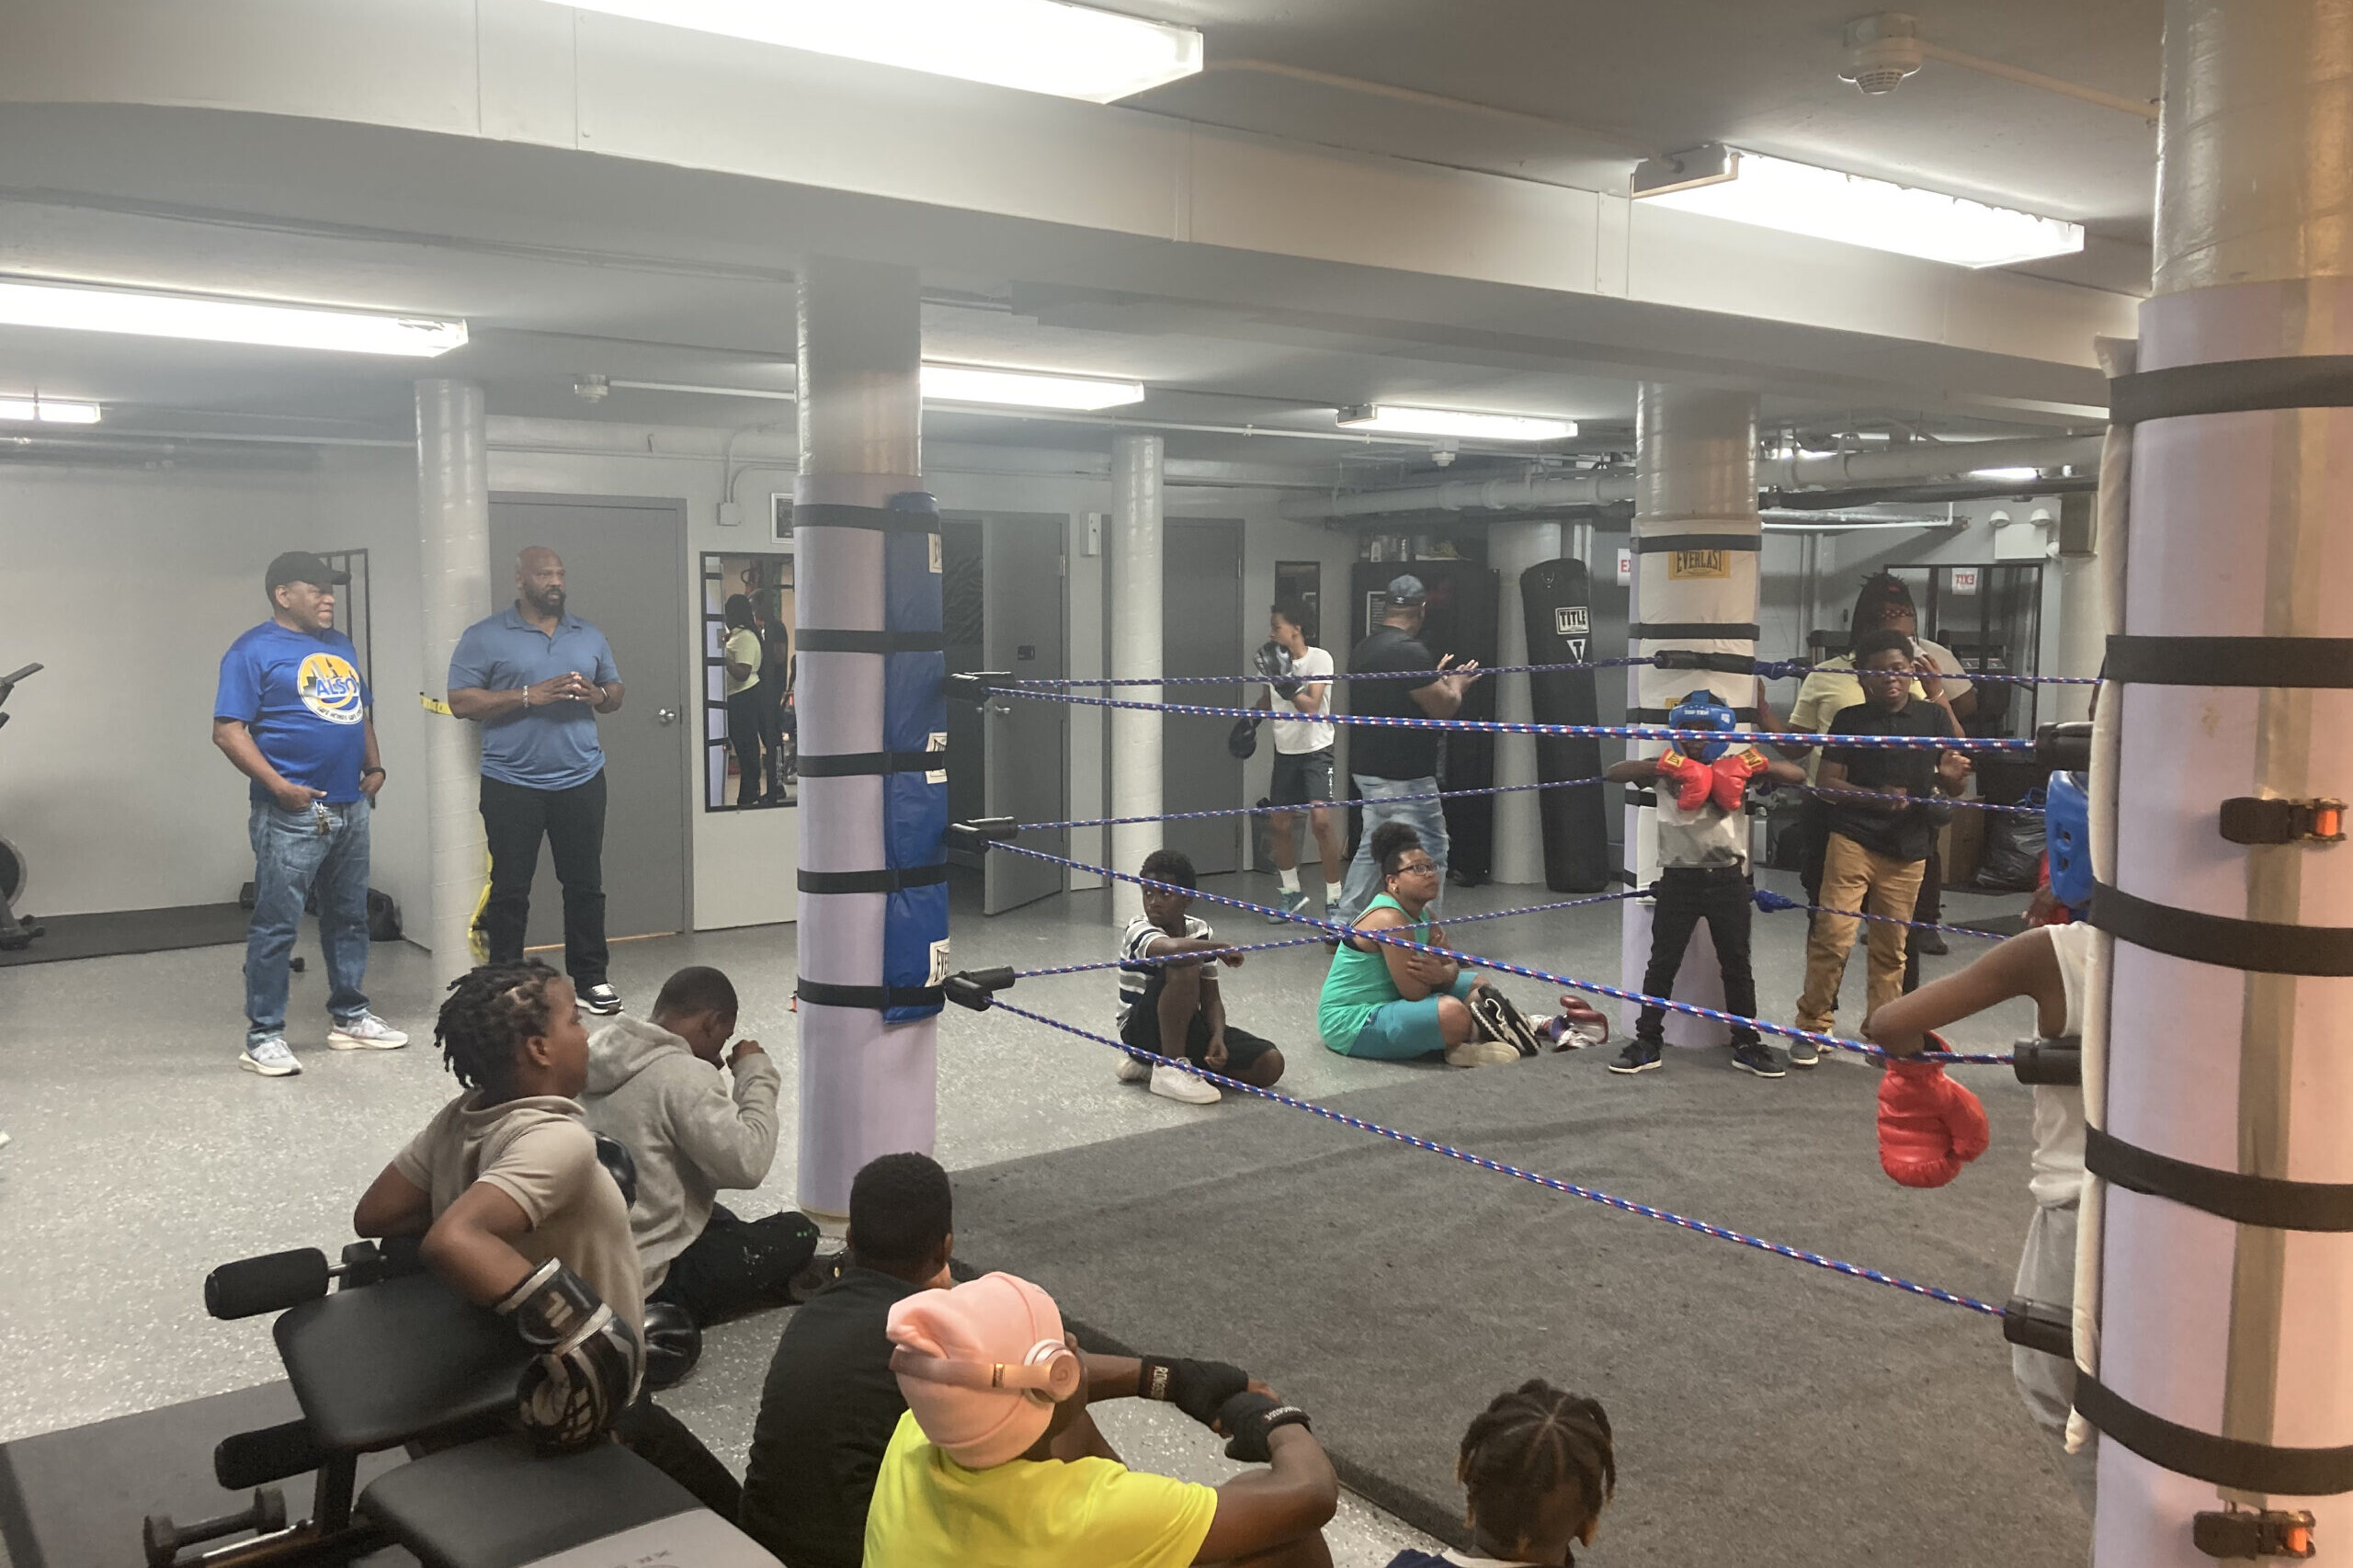 Youth and coaches gathered at the boxing club.